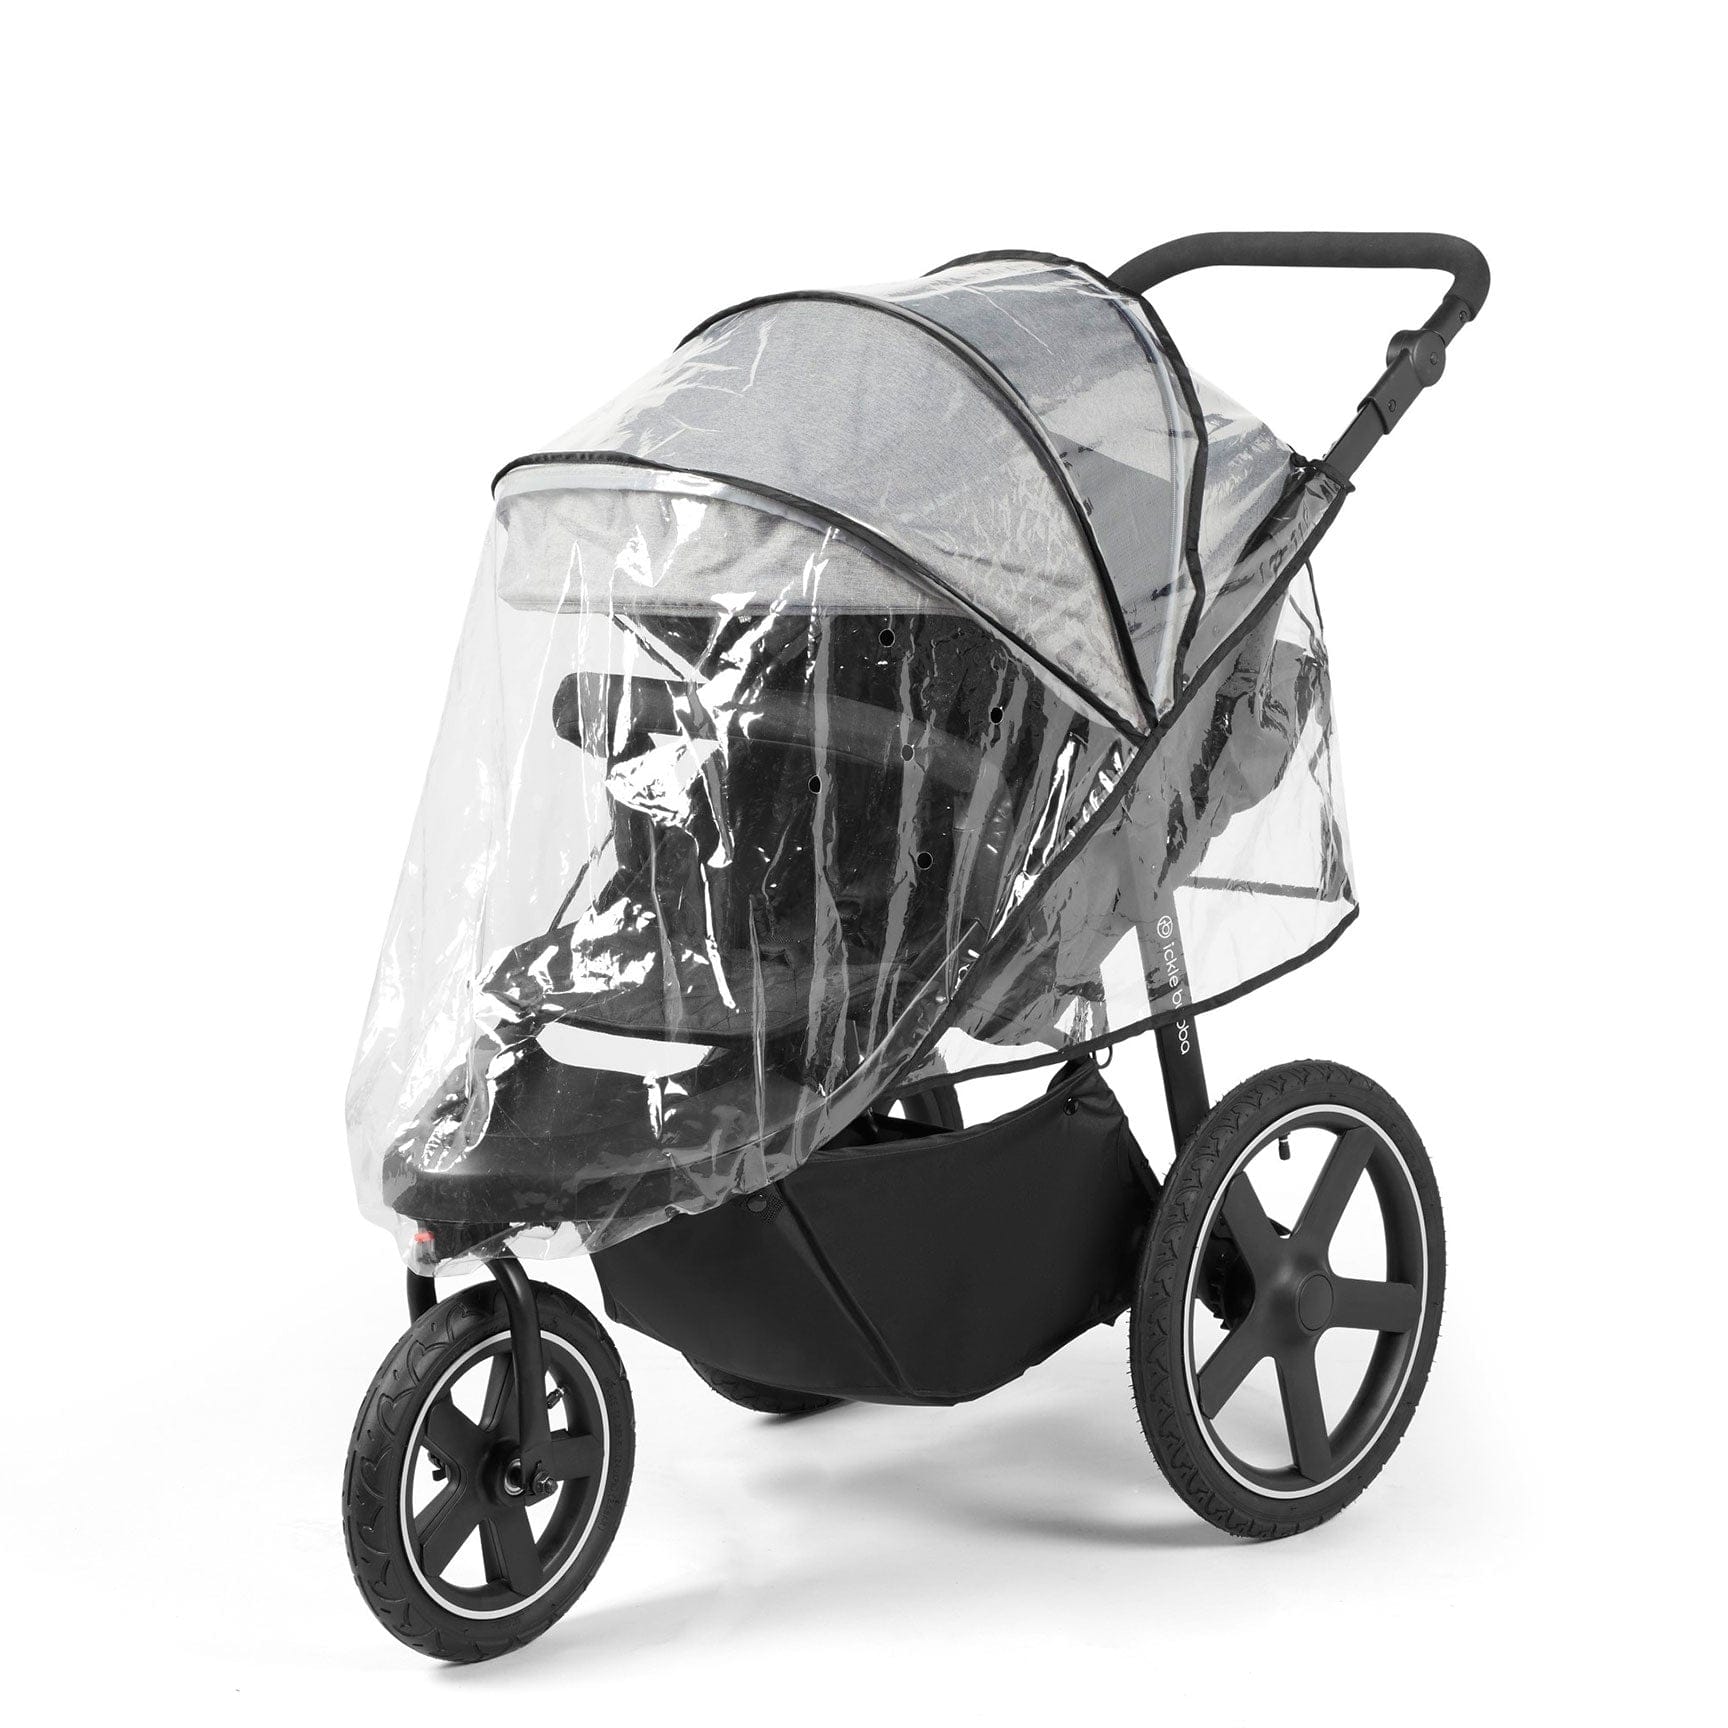 Ickle Bubba Venus Max Jogger Stroller in Black/Space Grey 3 Wheelers 18-004-200-014 5060777950347